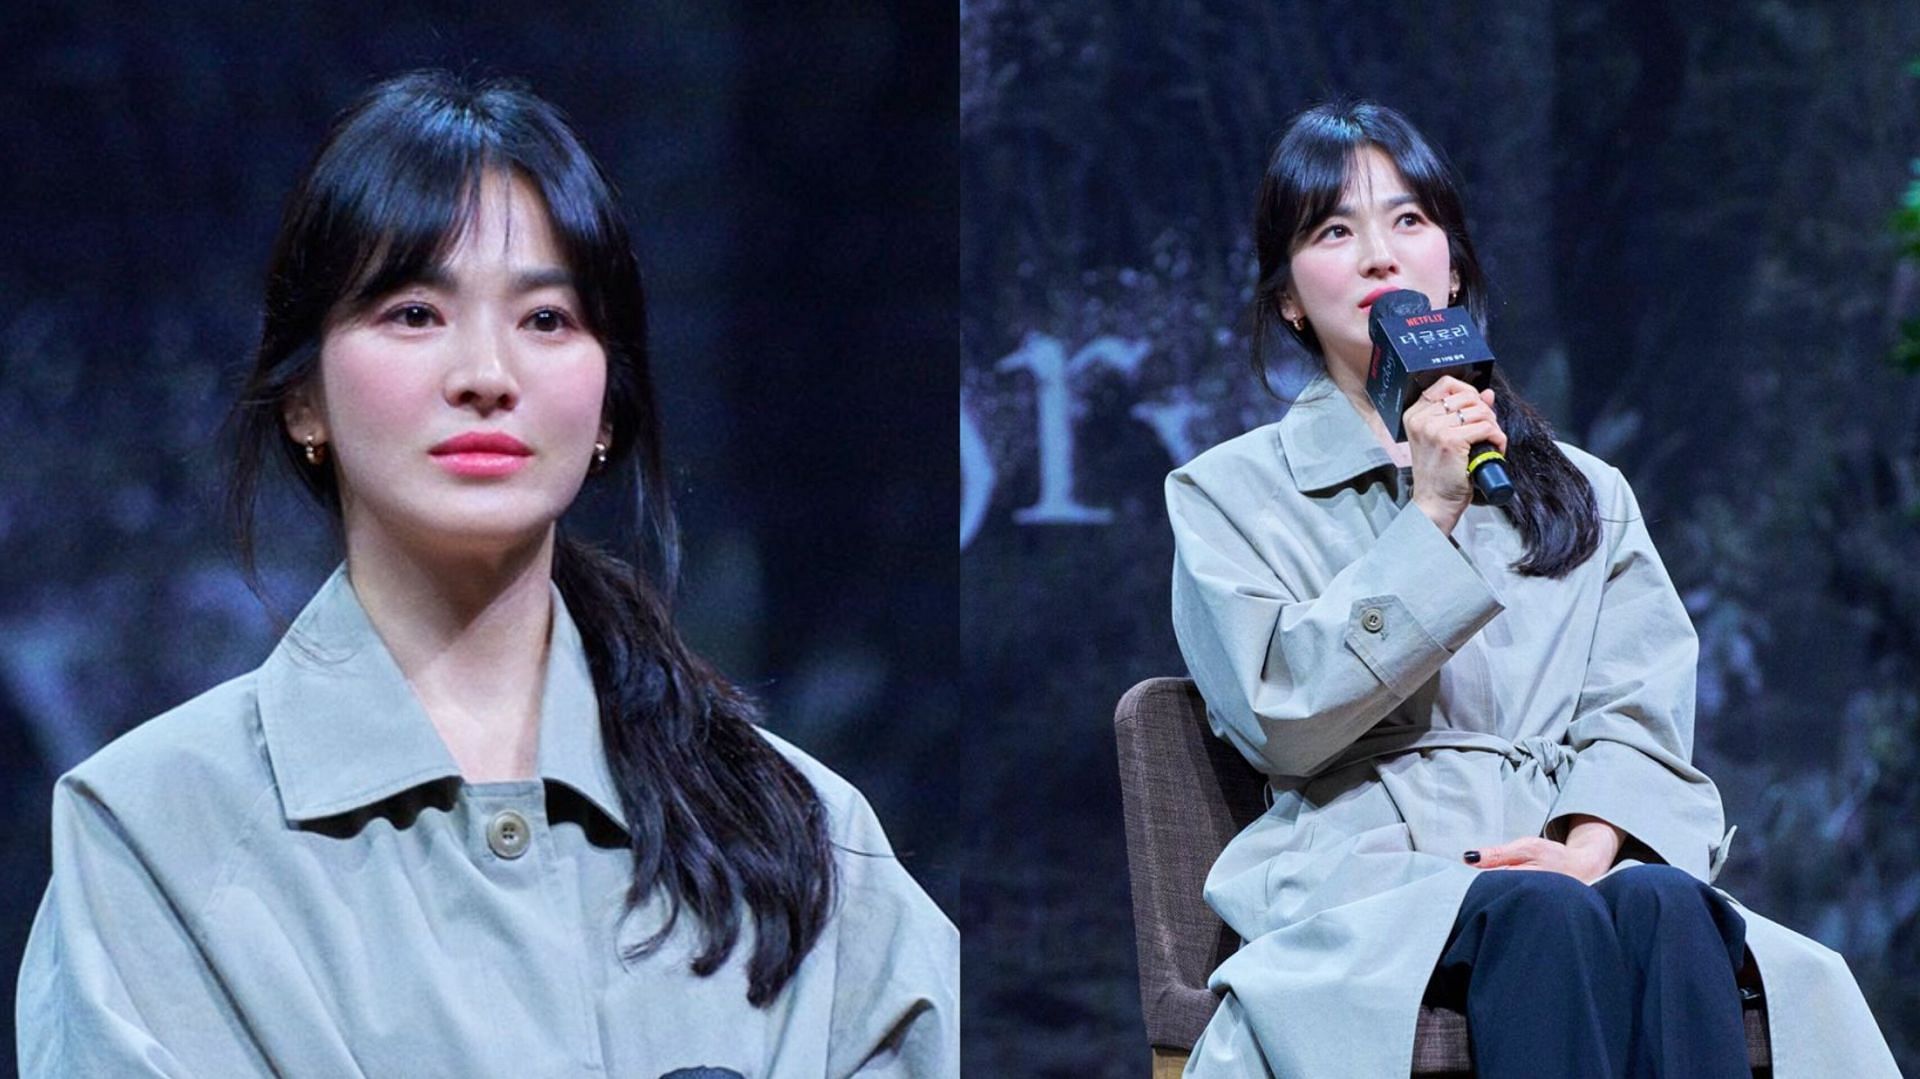 Featuring Song Hye-kyo at the press conference of The Glory (Image via crushonkyo)